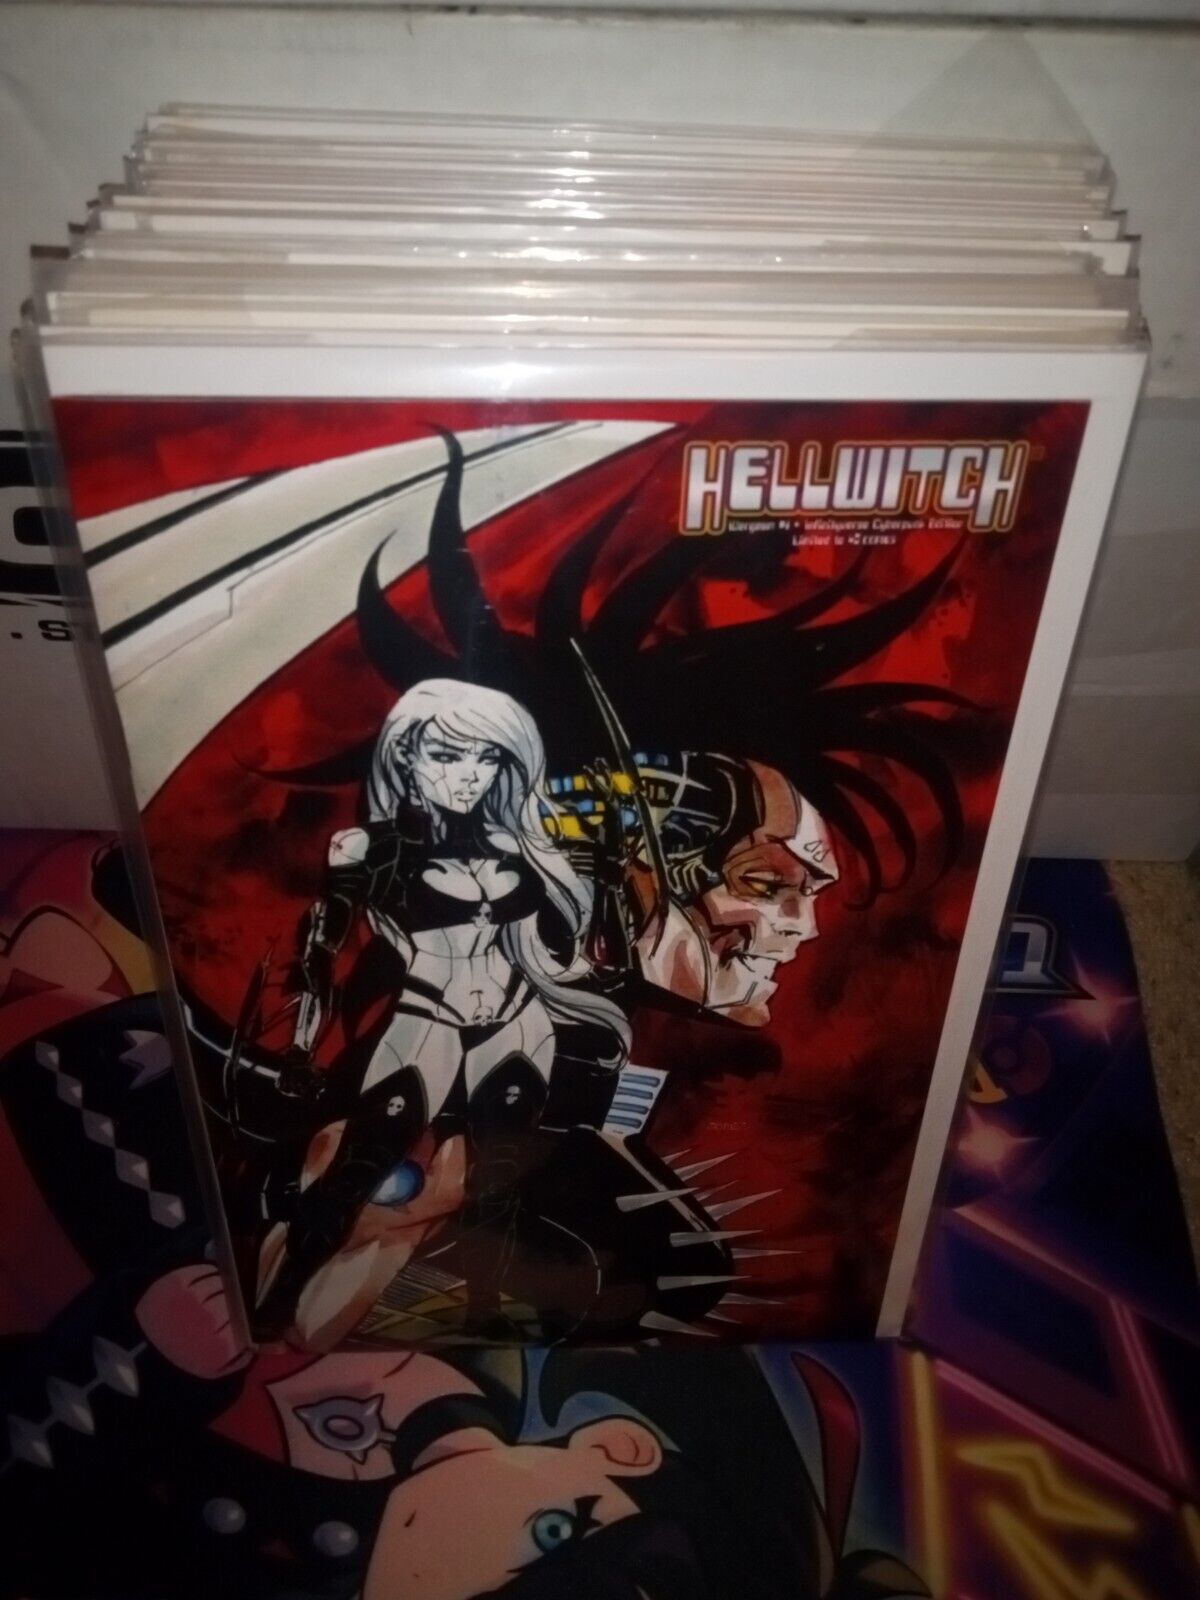 Hellwitch Vs. Lady Death Wargasm #1 Variant Limited To 40 Copies